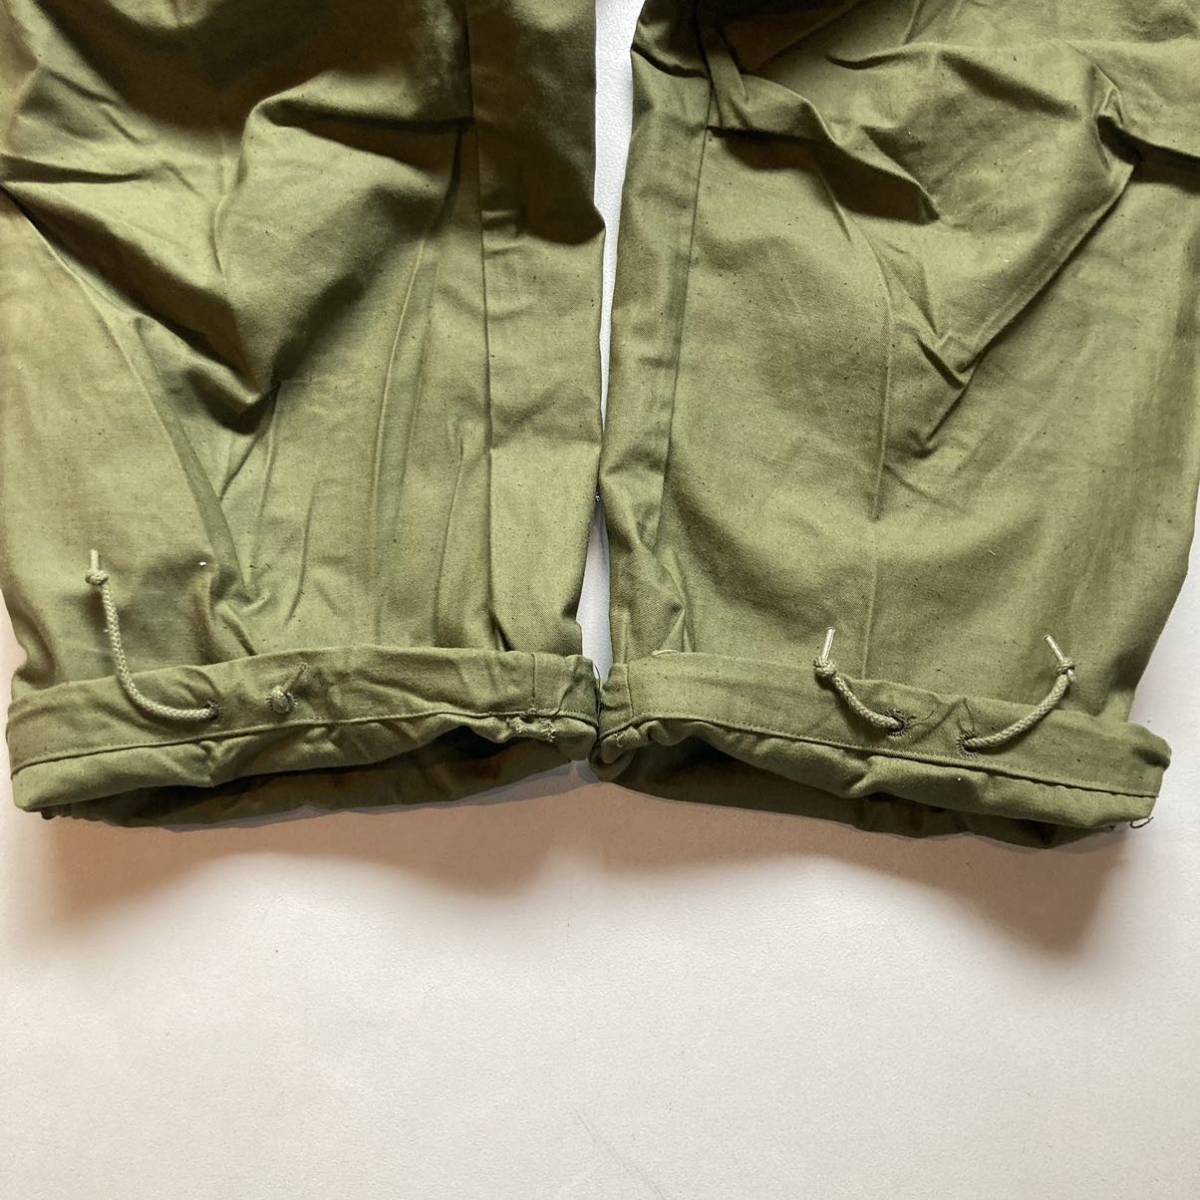 70s US ARMY M-65 field pants 「DEAD STOCK」カーゴパンツ M-65 米軍